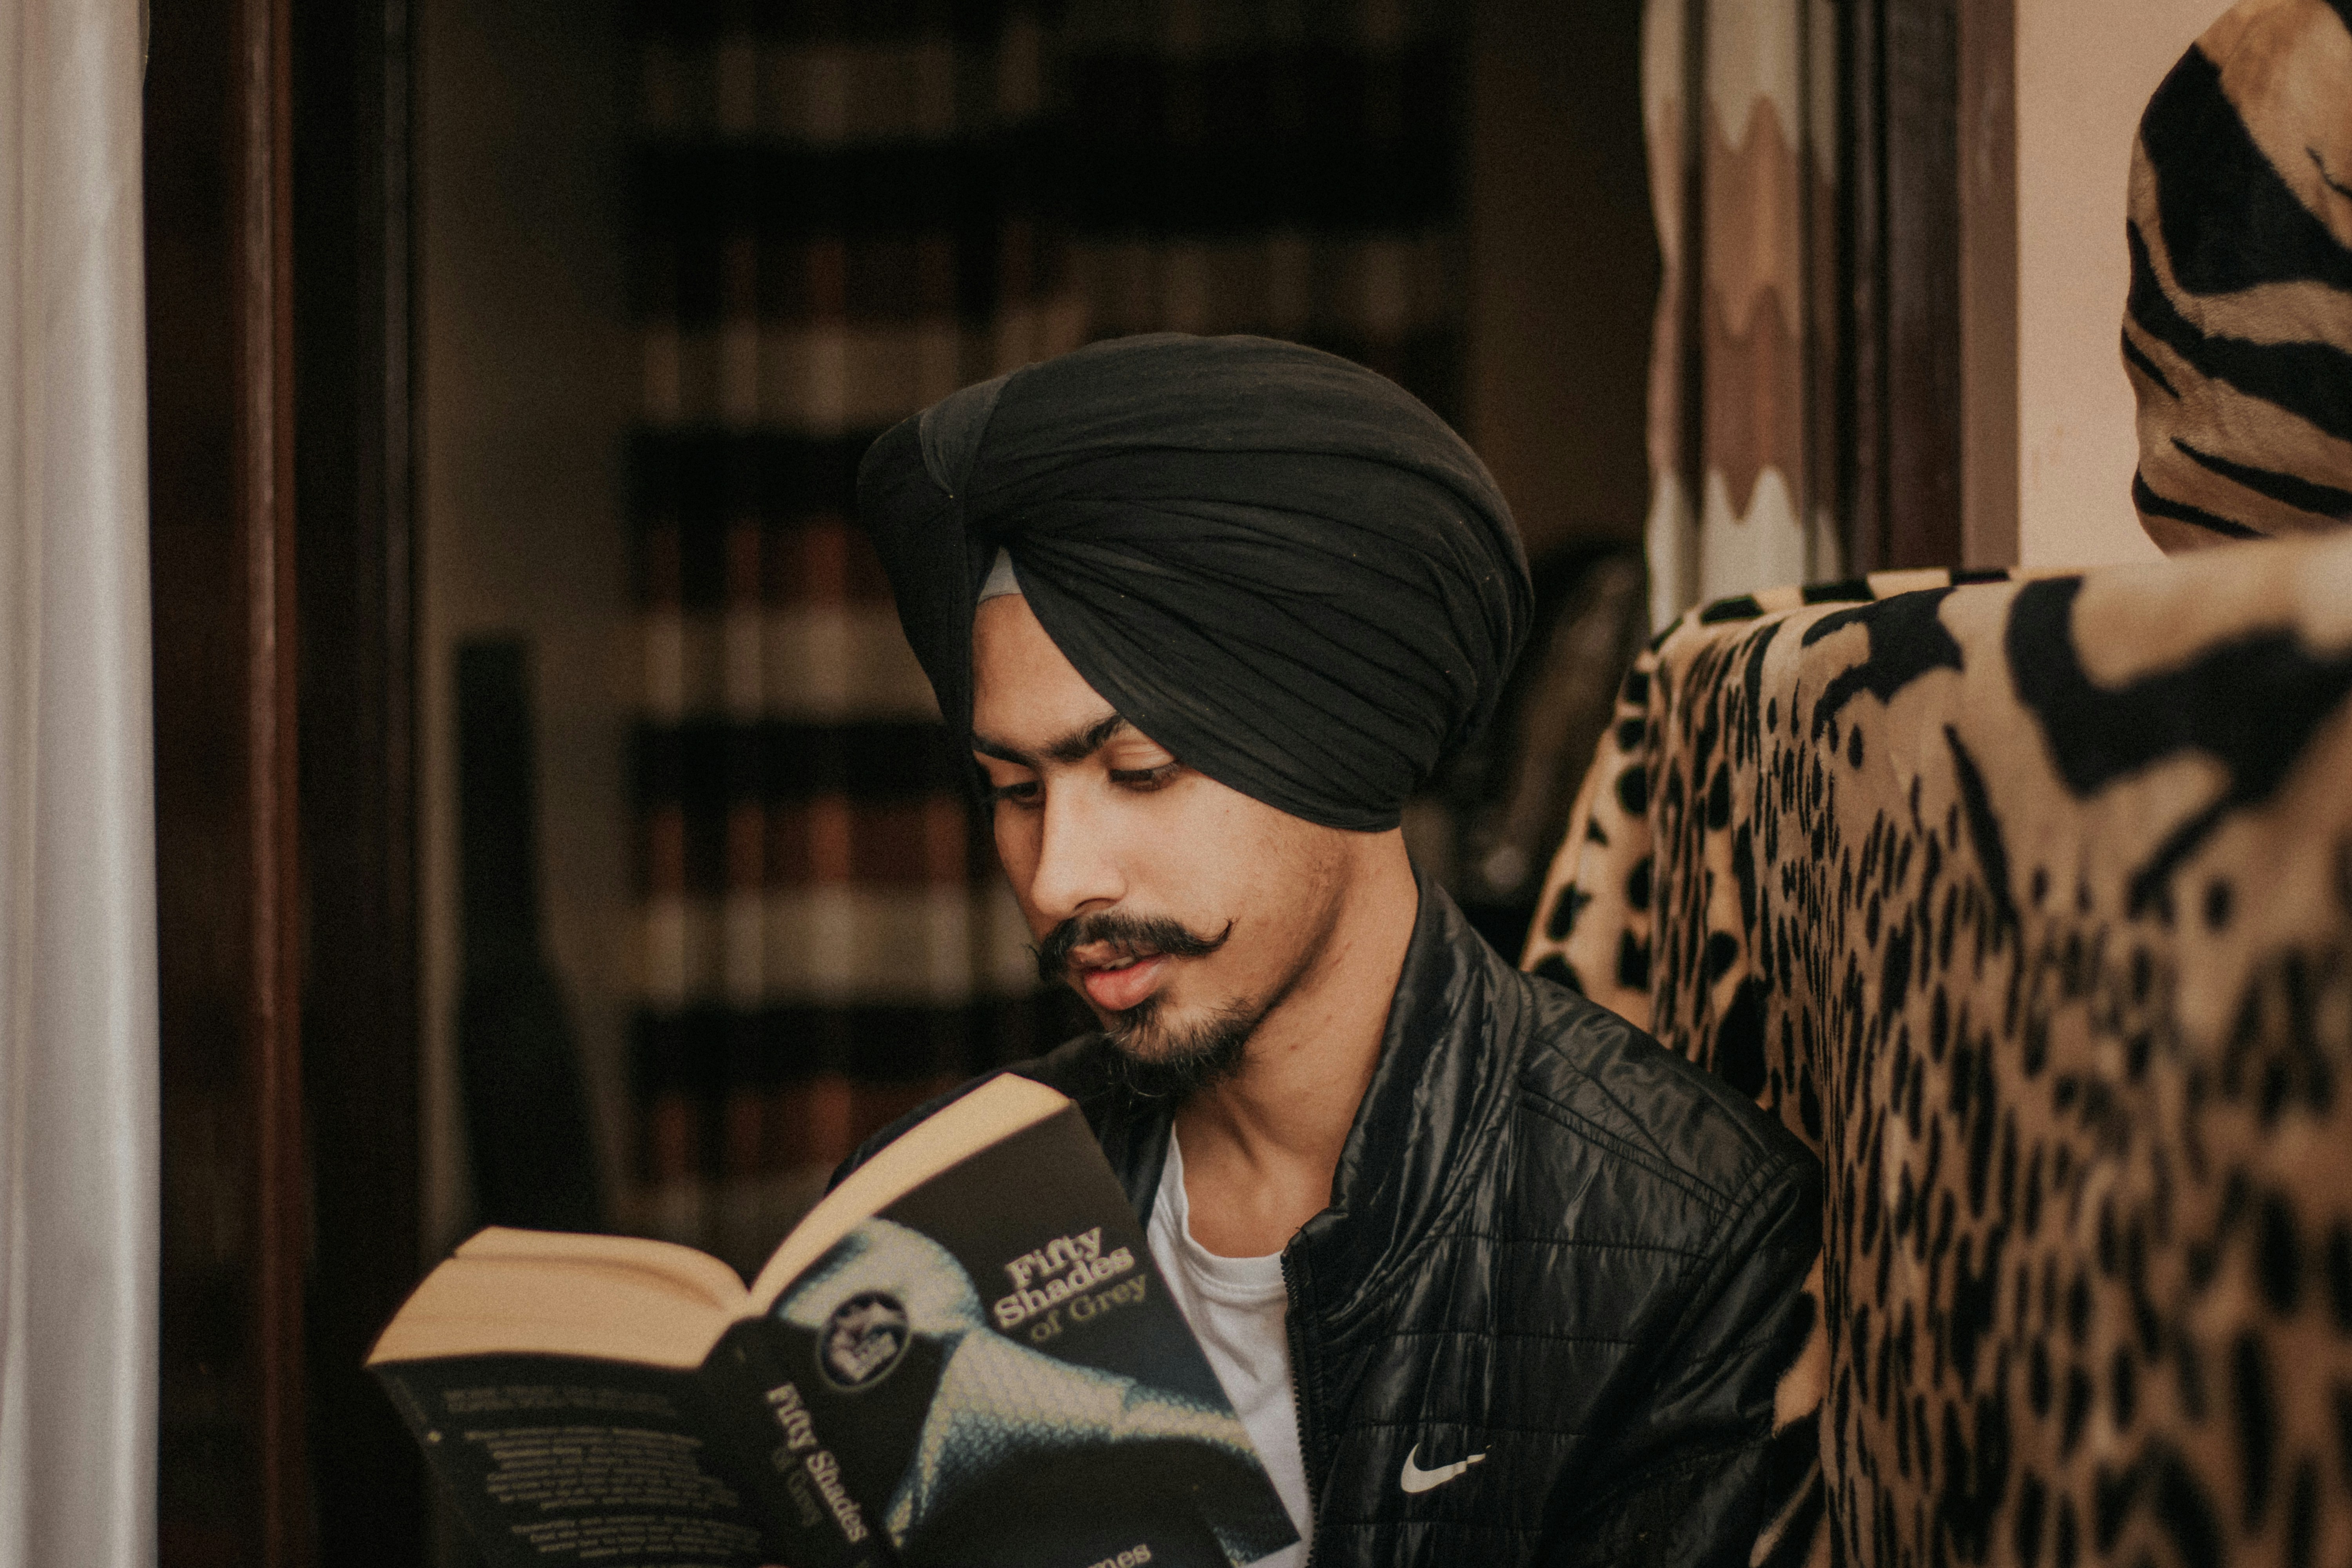 A young sikh boy reading book during quarantine and spending quality time